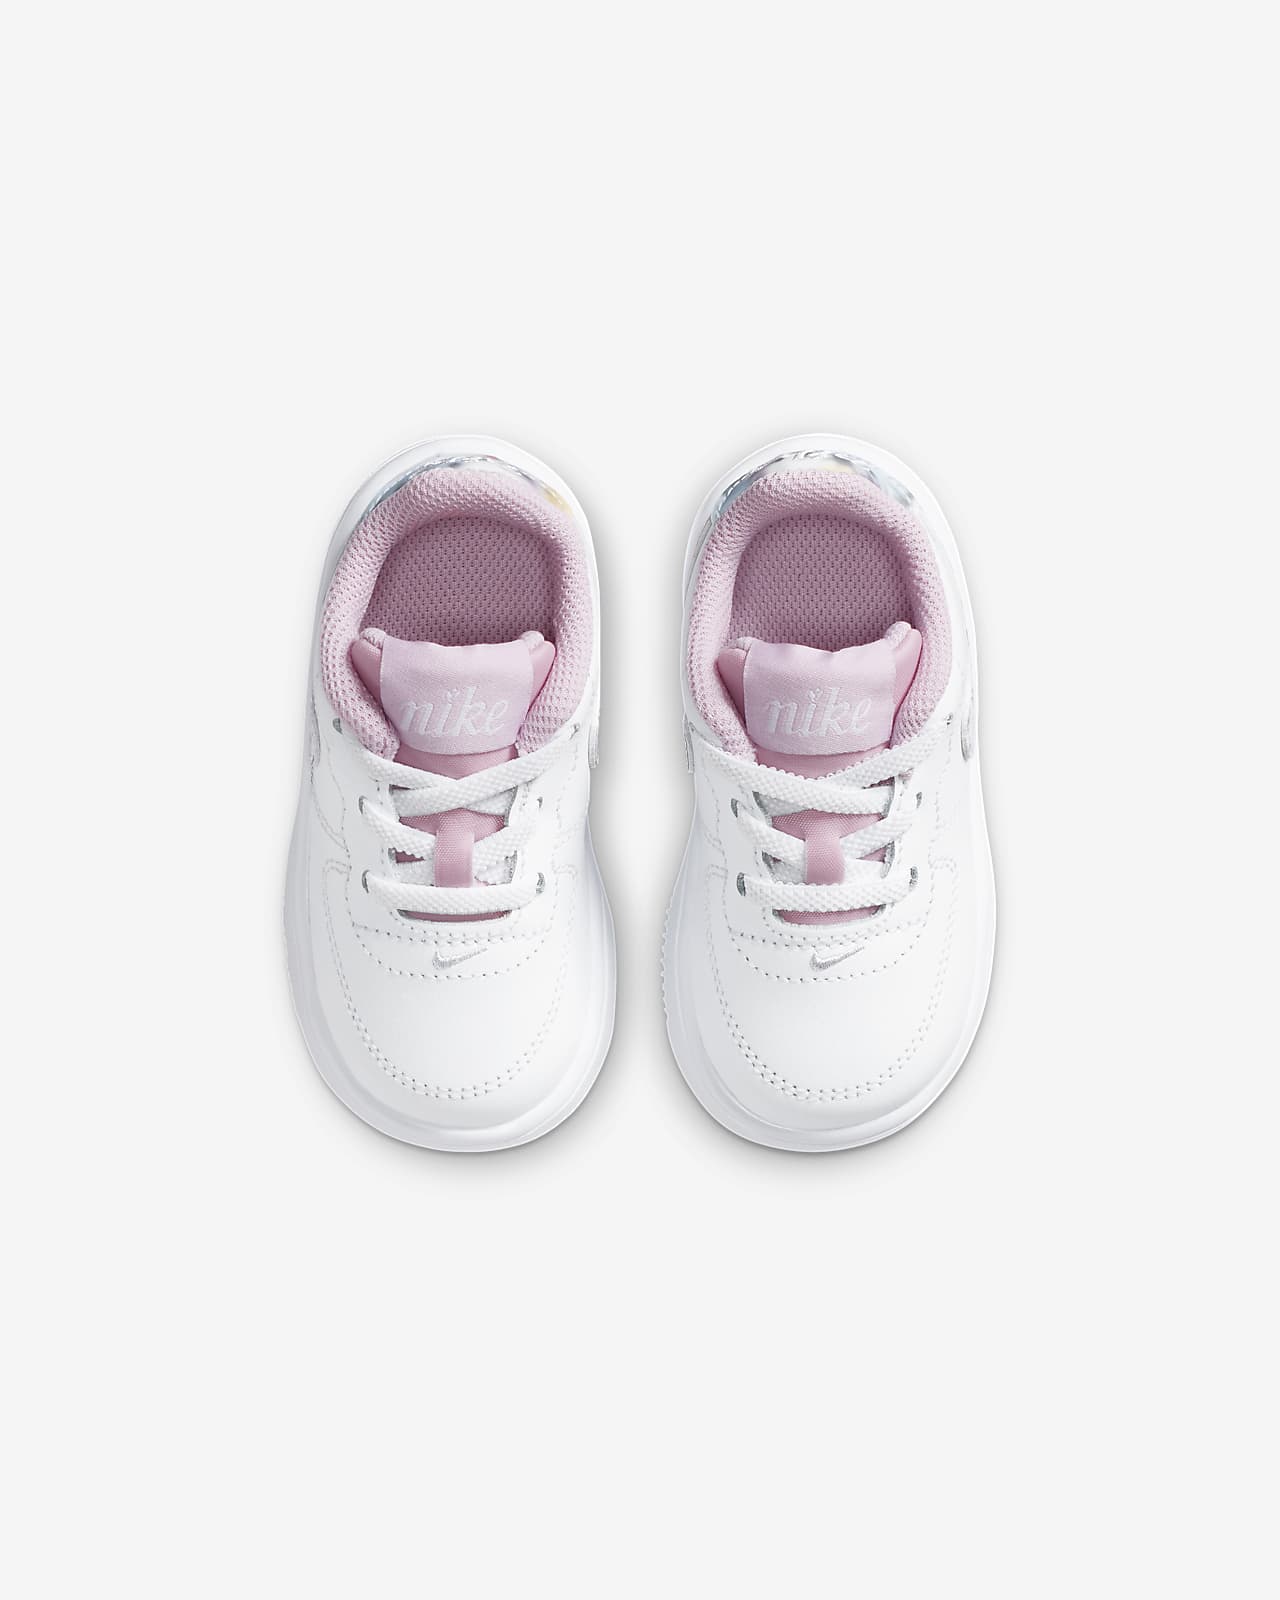 nike baby shoes pink